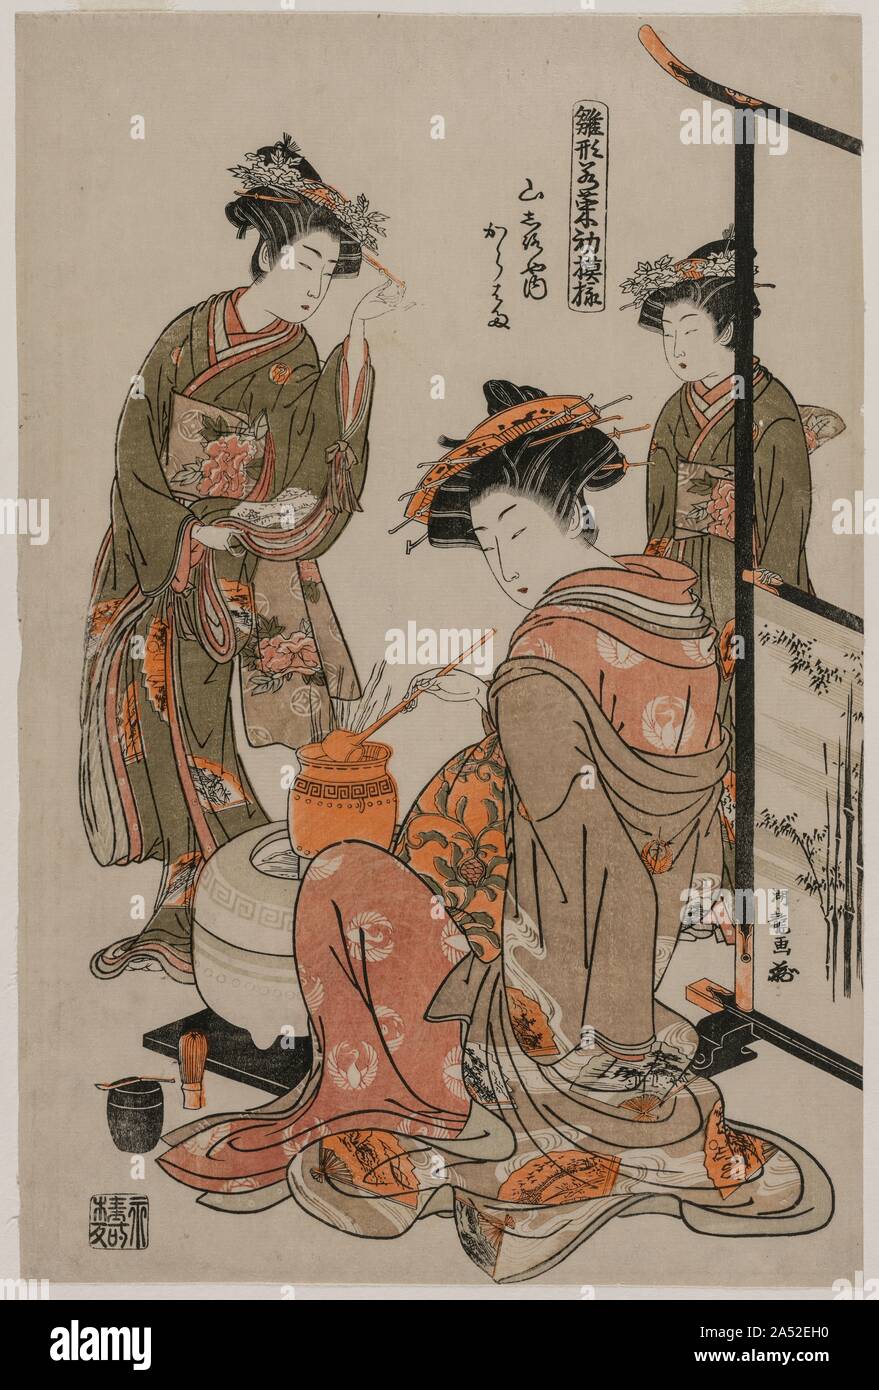 The Courtesan Karahama of Yamashiroya Performing the Tea Ceremony (from the series Models for Fahions: New Designs as Fresh as Young Leaves), late 1770s. Stock Photo